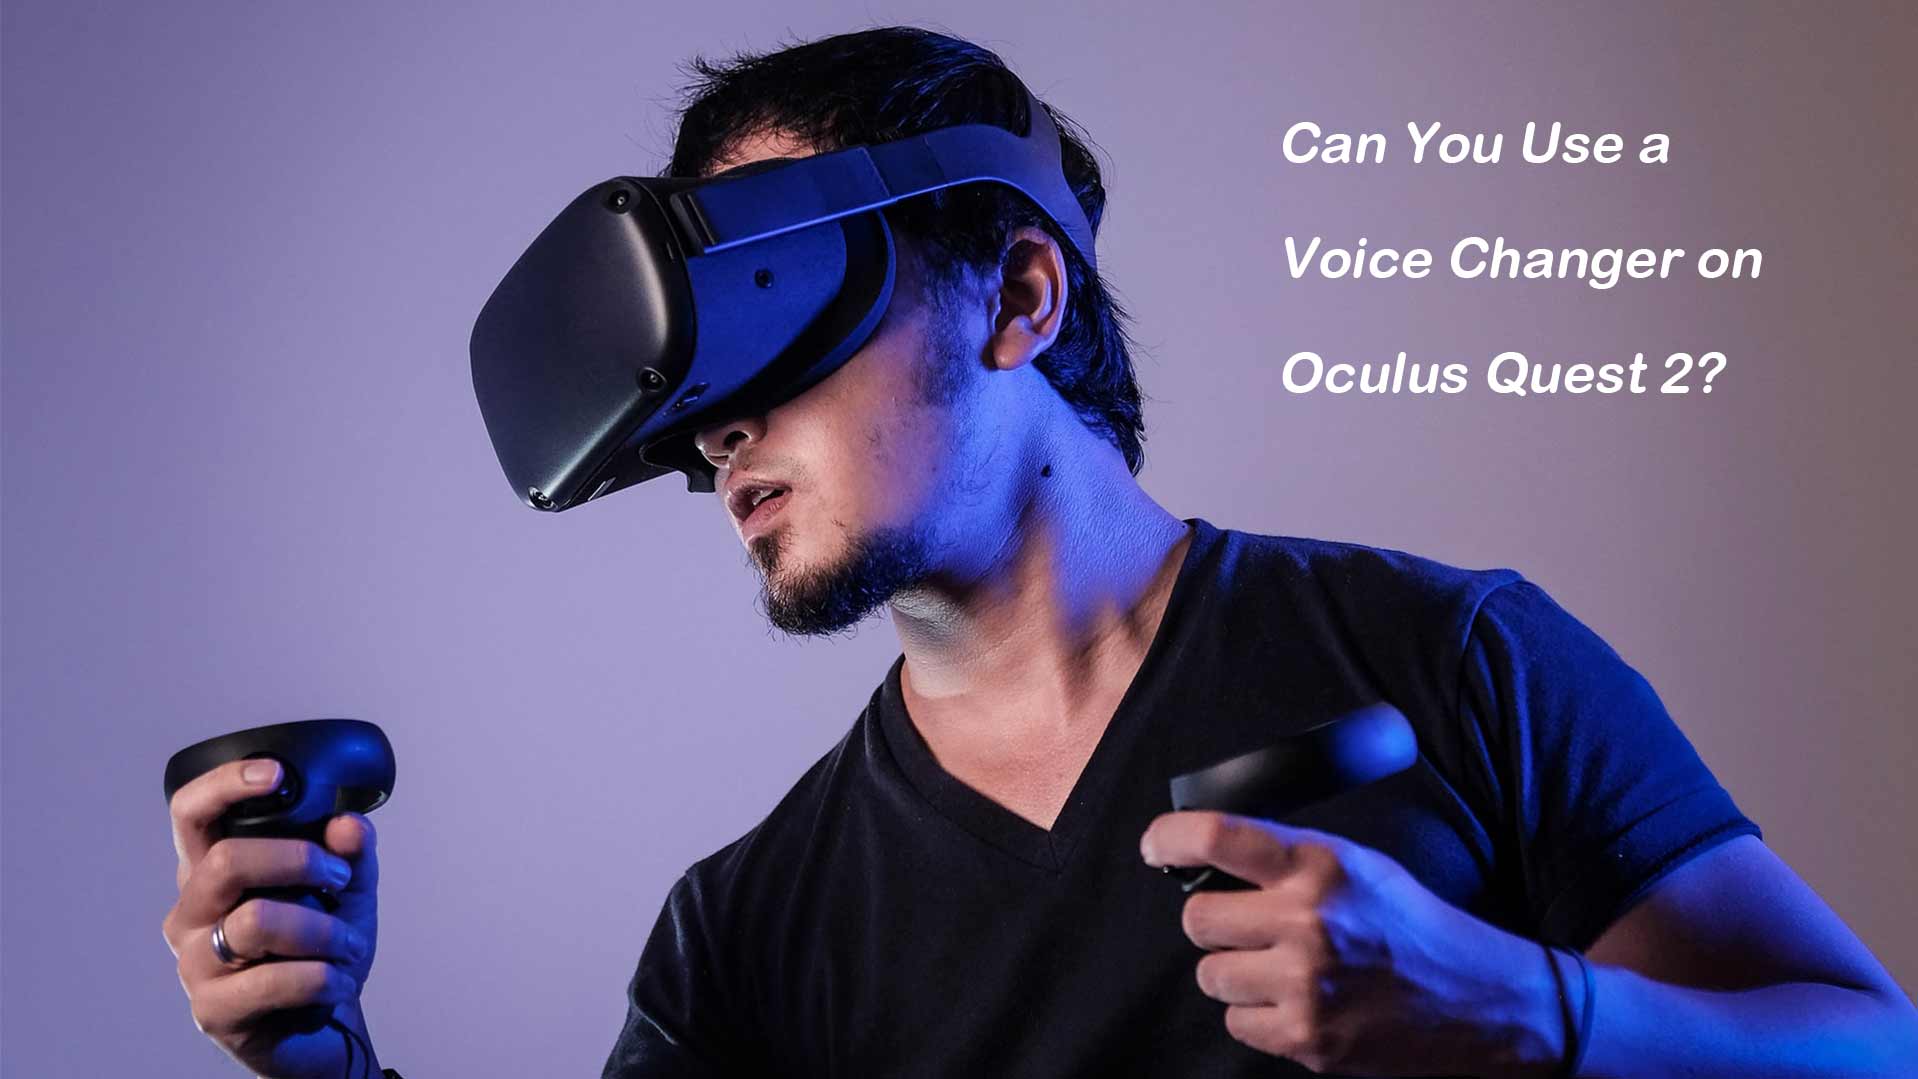 How to Use Voice Changer on Oculus Quest2